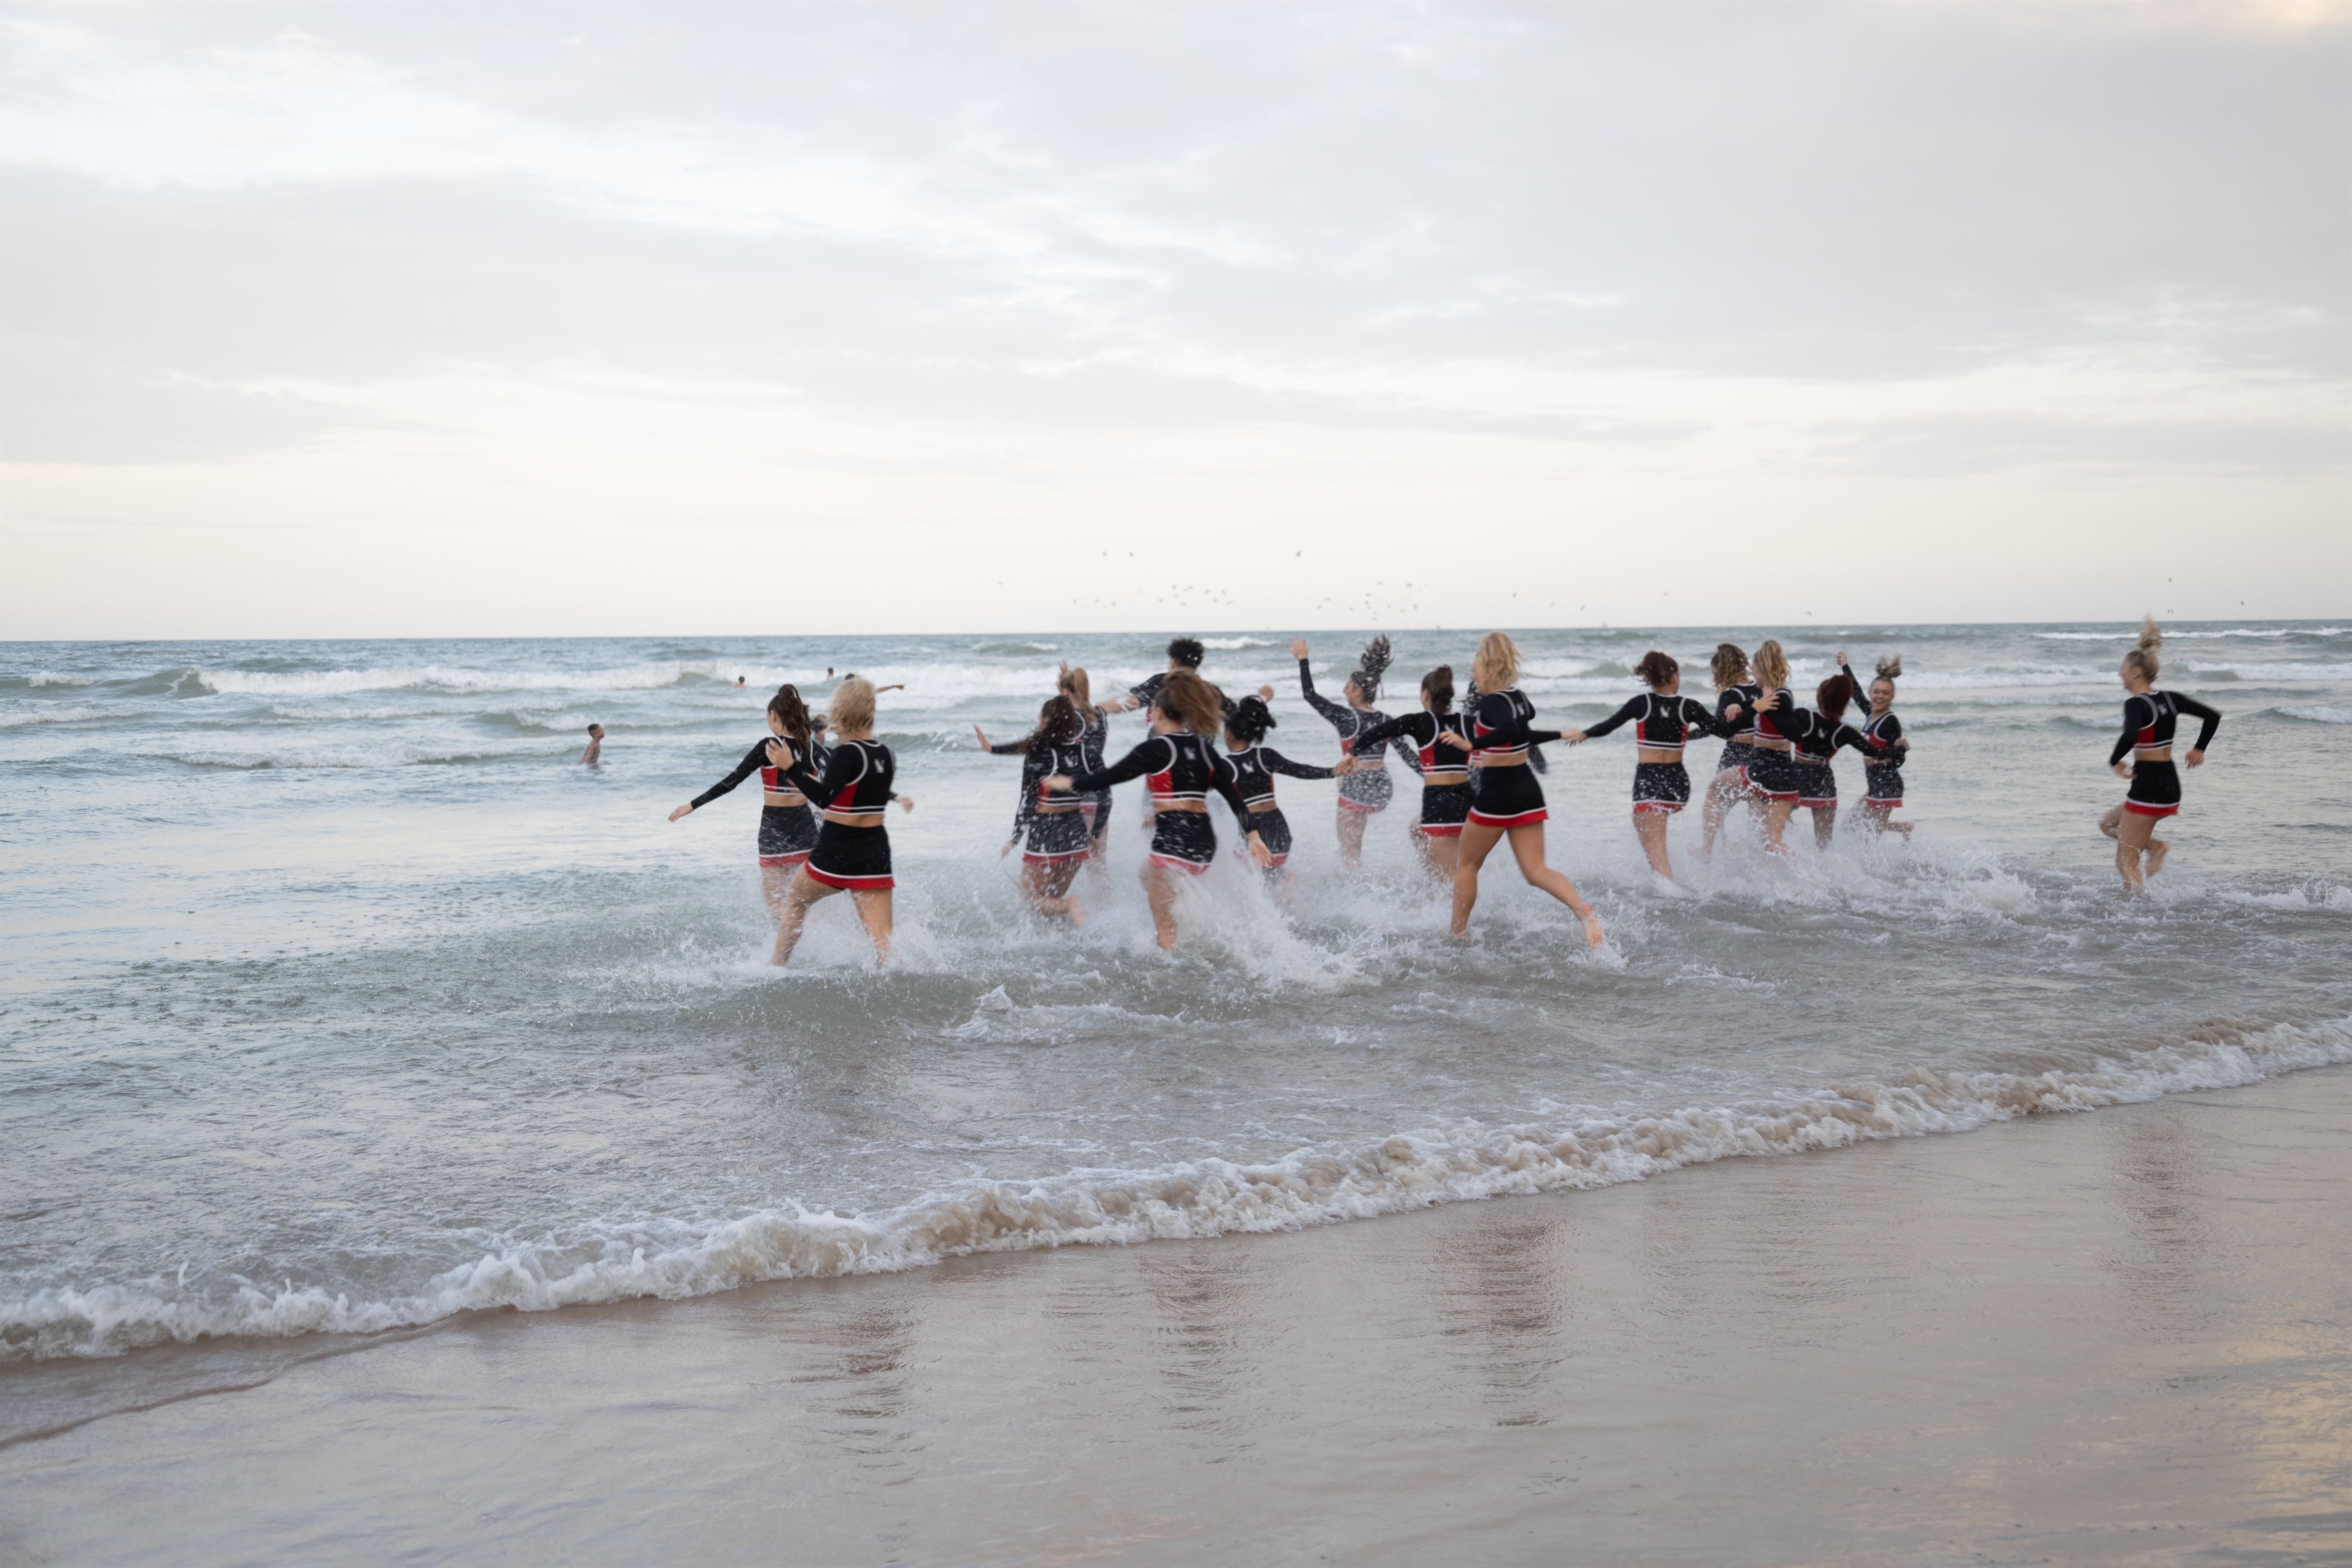 The cheerleading team runs out into the water to celebrate their win. Photo courtesy of Montclair State Cheerleading.